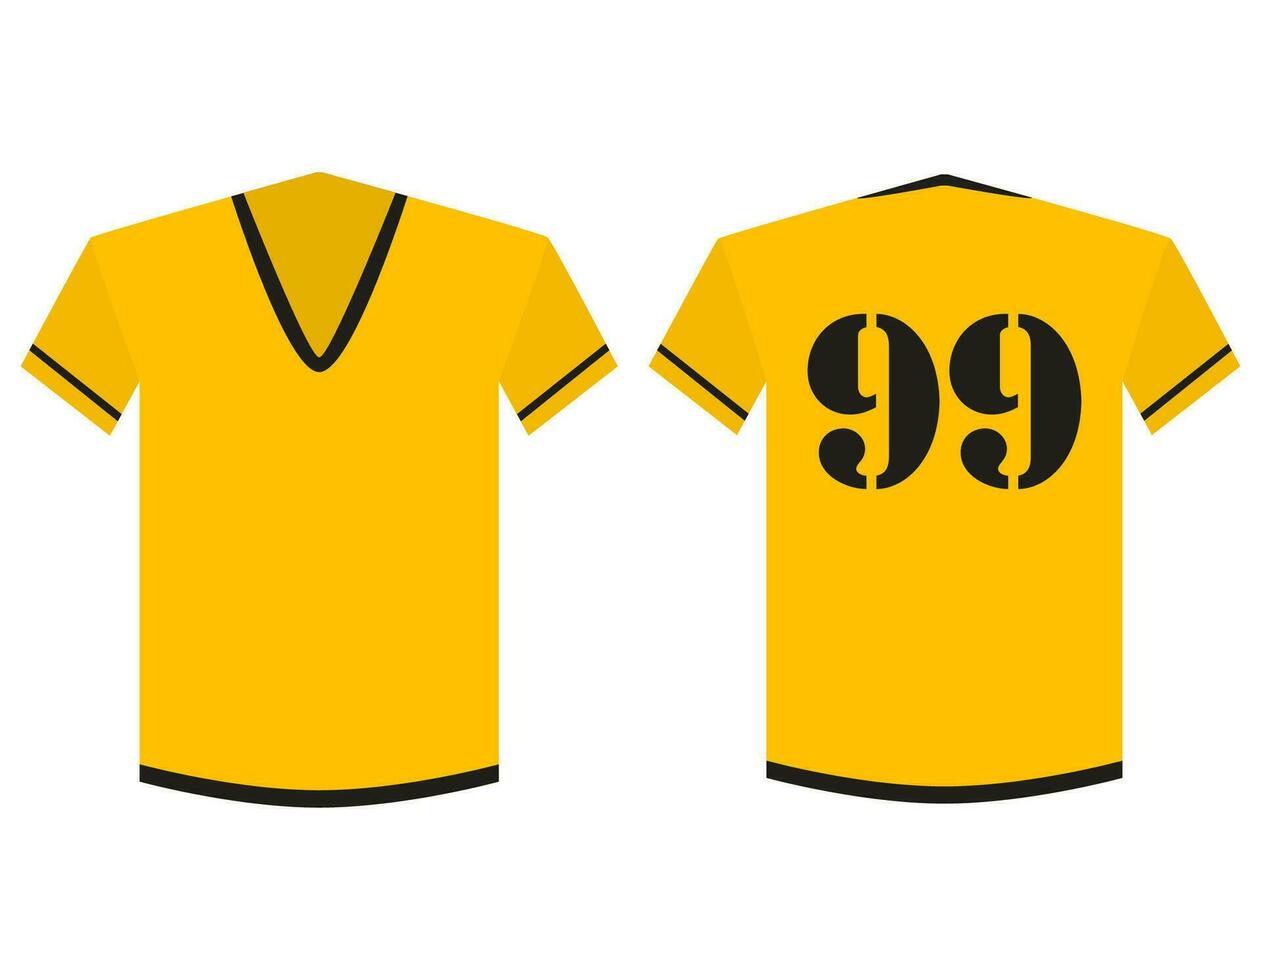 T-shirt yellow and black soccer or football template for team club isolated on white background. Front and back view soccer uniform in flat style. T-Shirt sport Design. Vector Illustration.